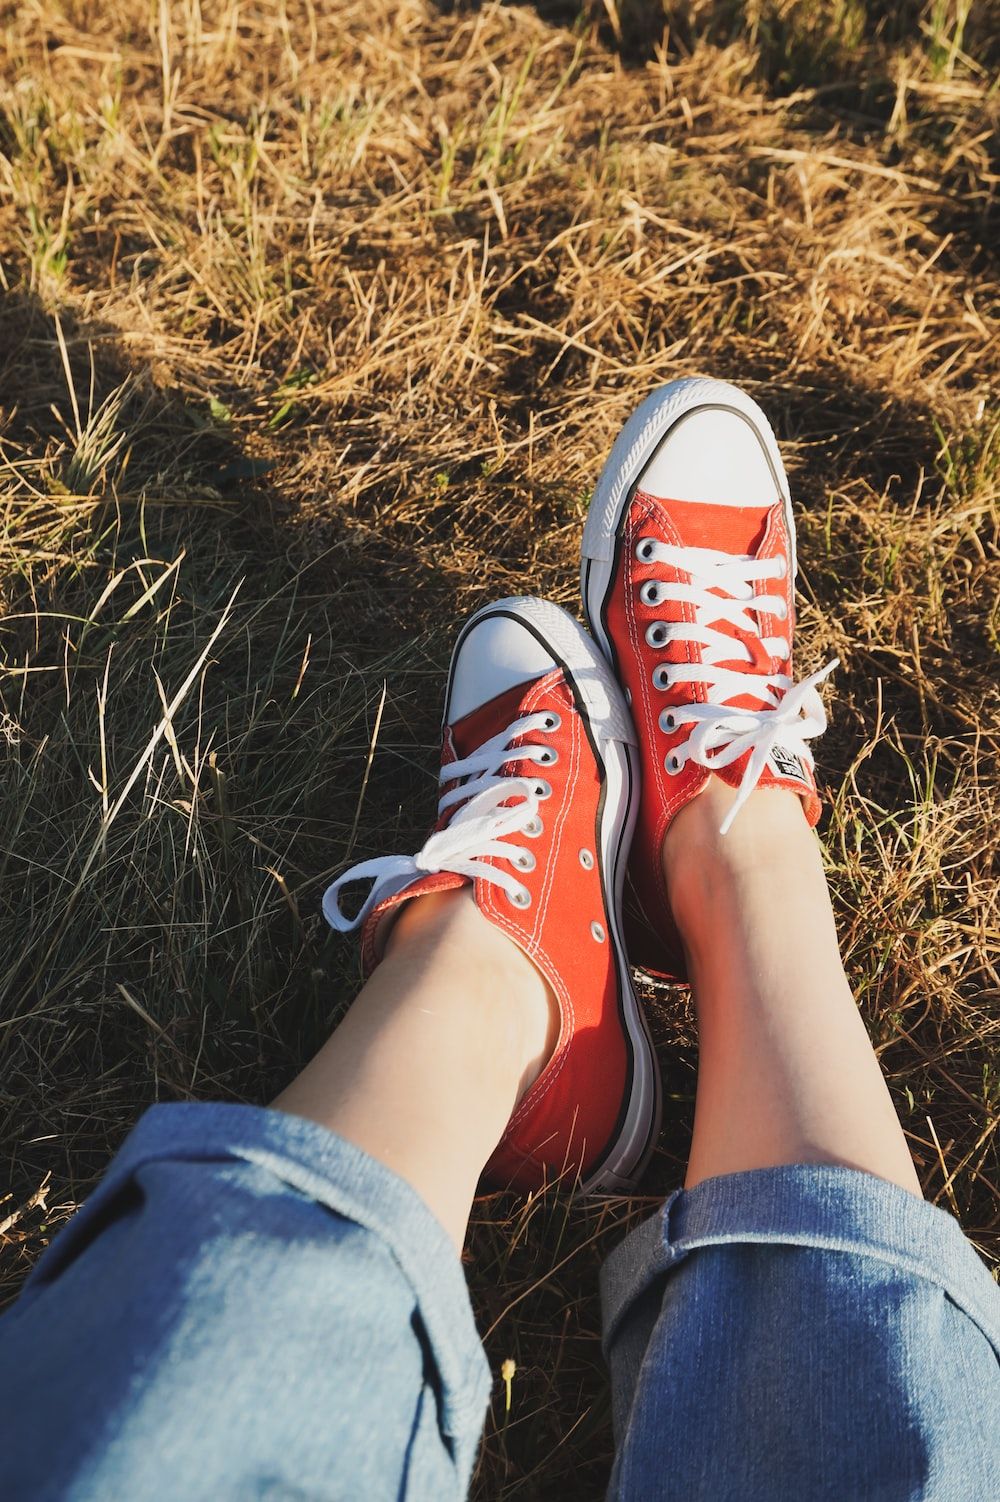 A person wearing red converse sneakers - Converse